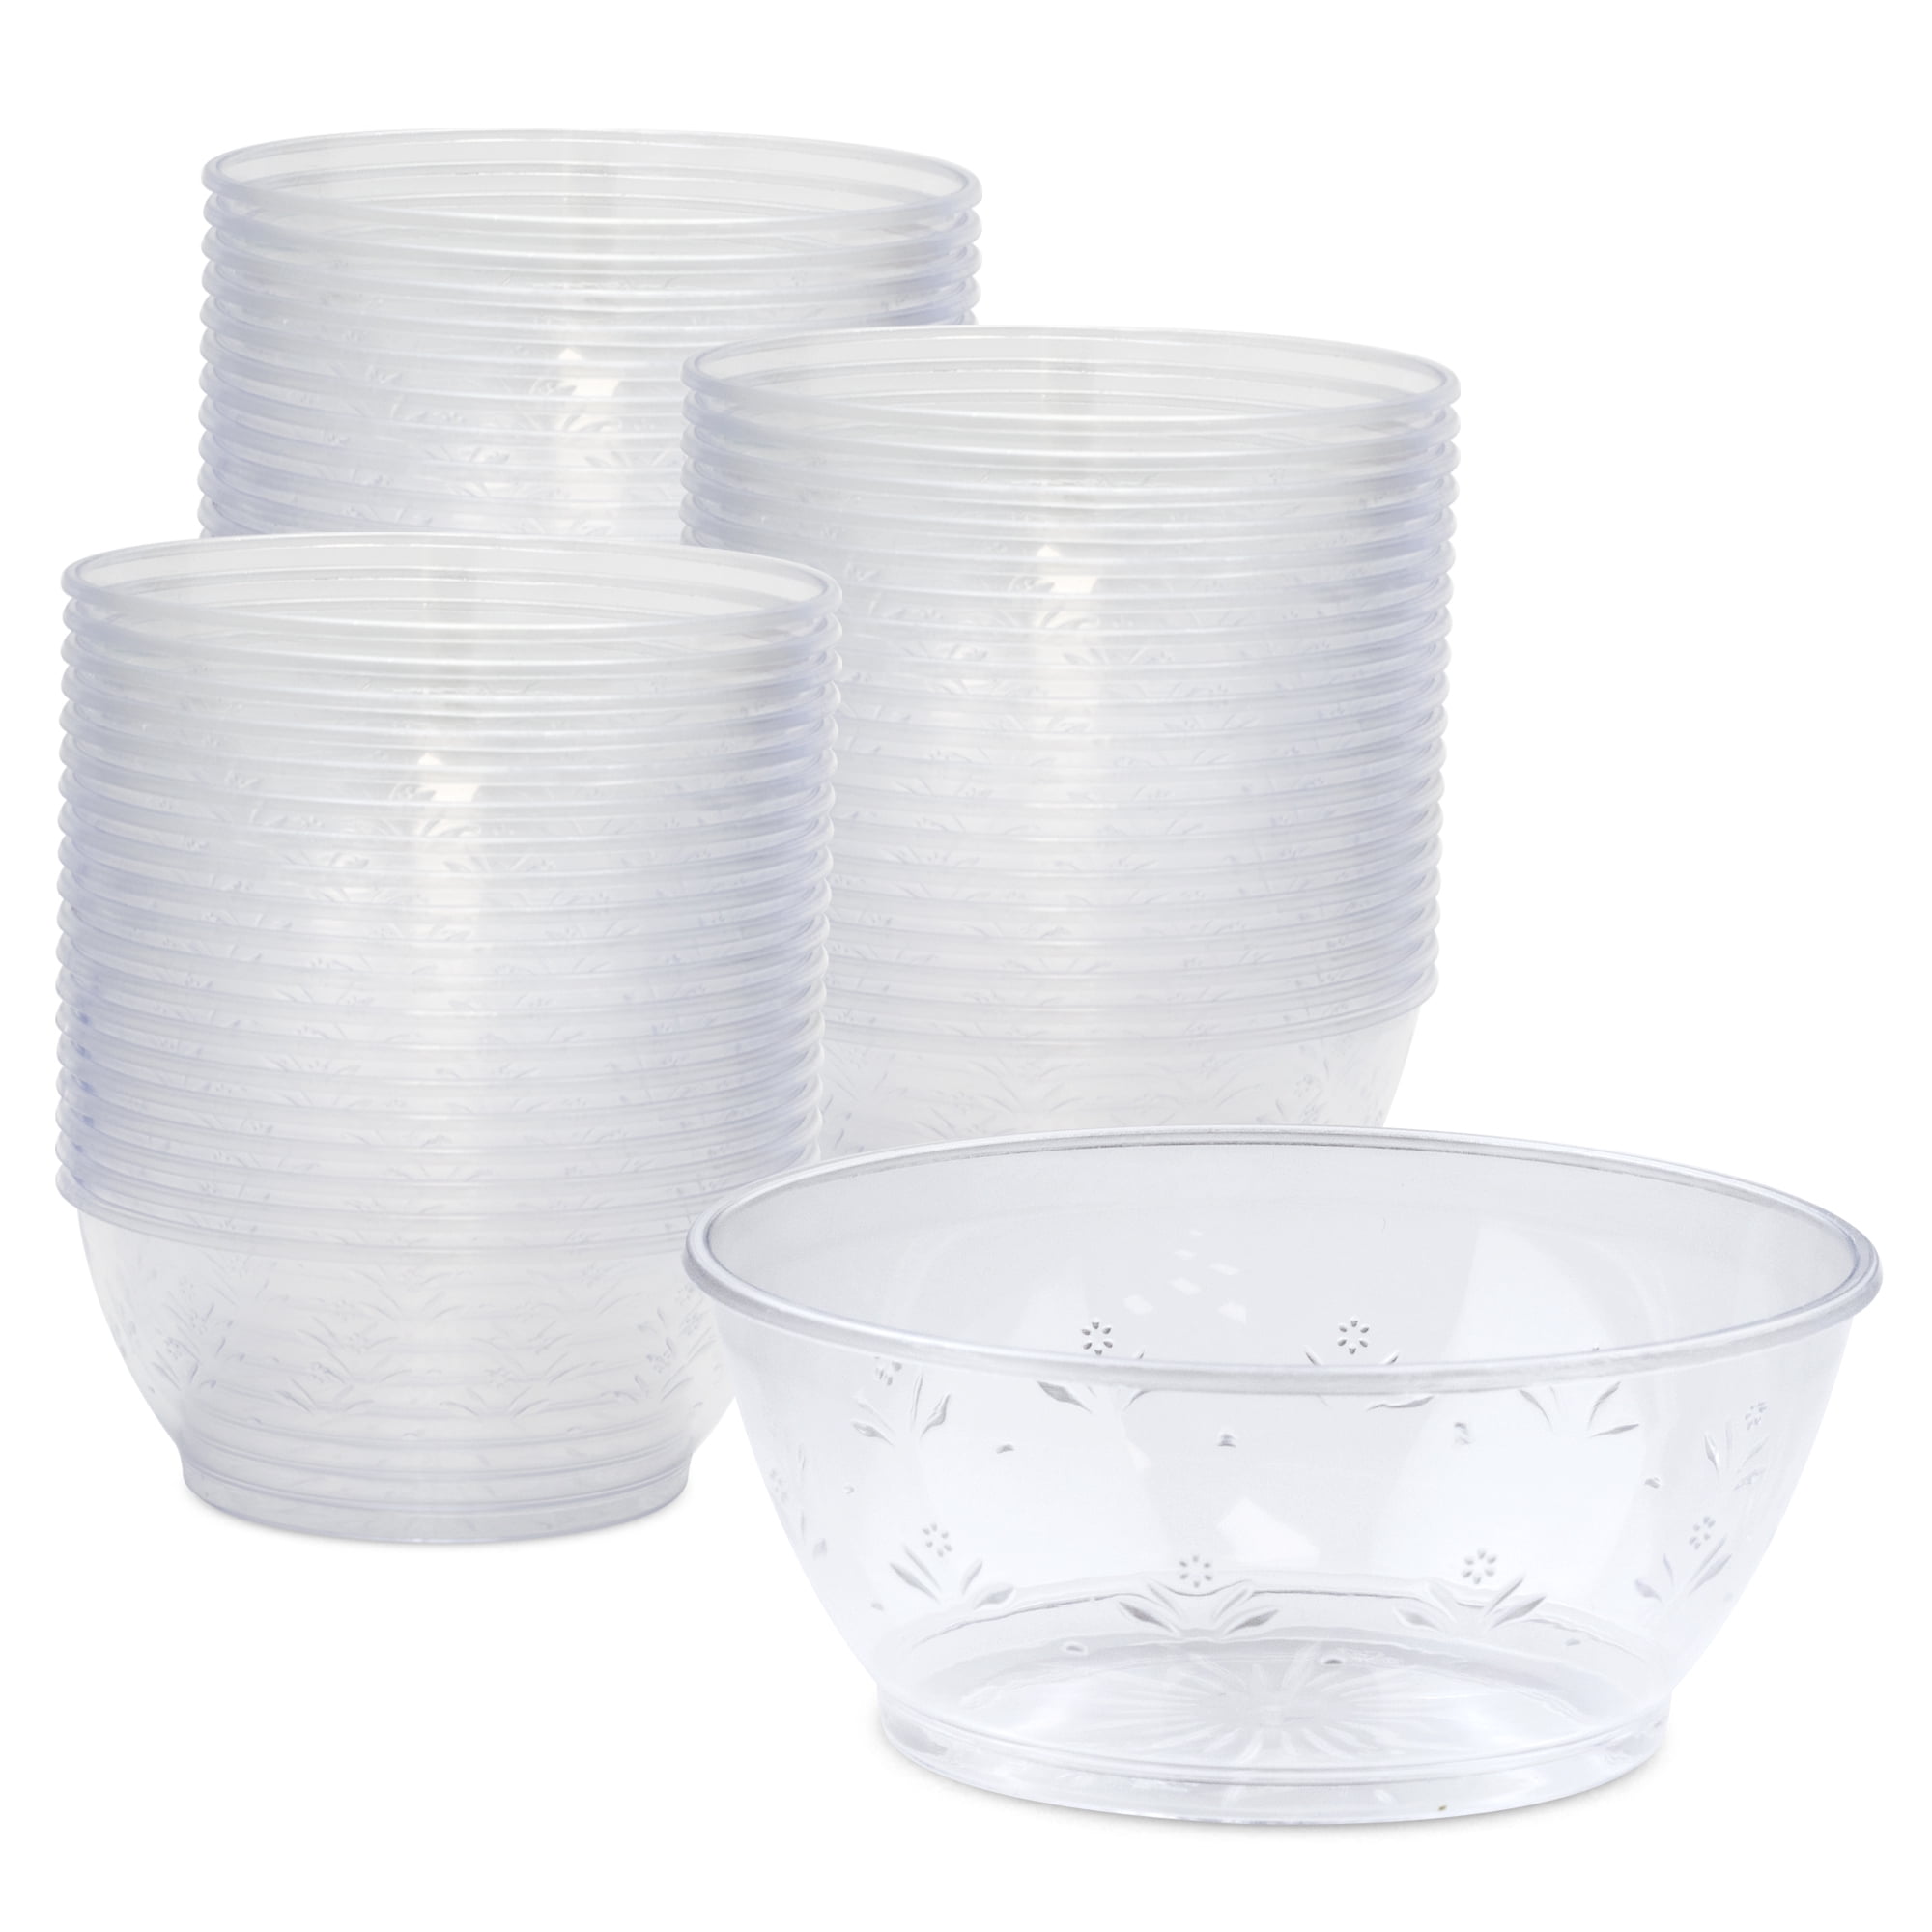 12 Plastic Oval Dishes high quality clear cup dessert  bowls holders - 